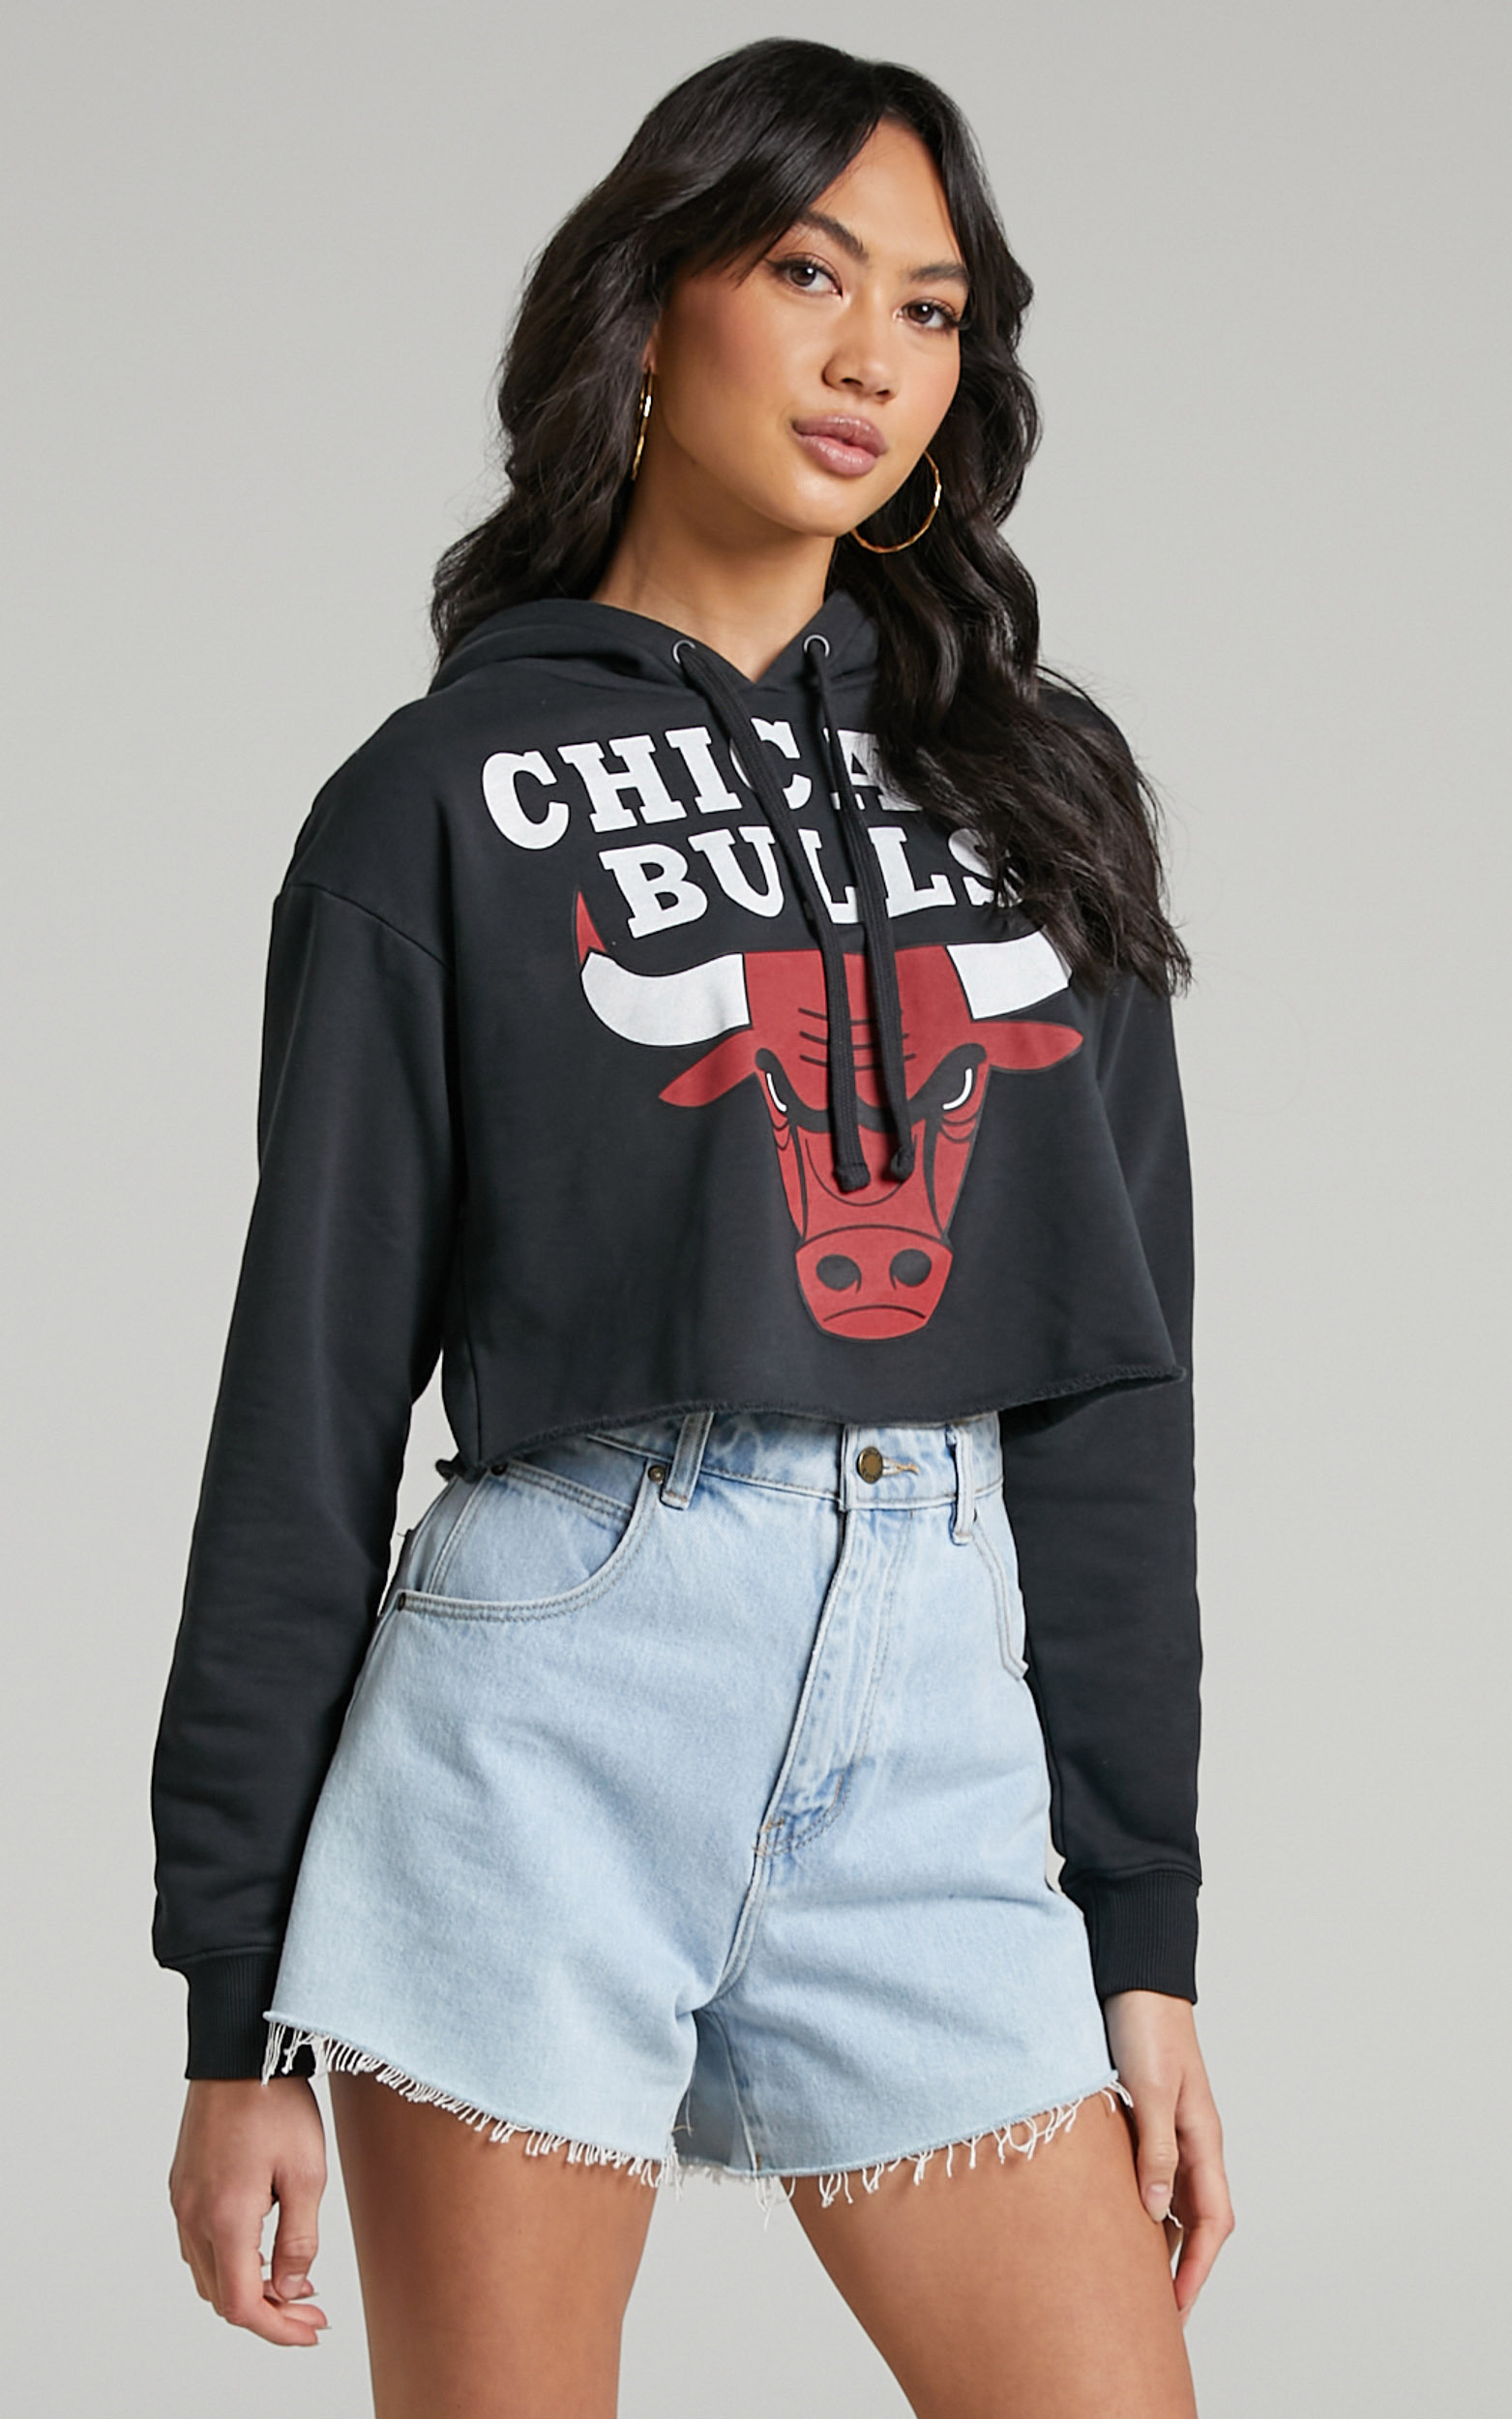 clergyman Unforeseen circumstances connect Mitchell & Ness - Chicago Bulls Wordmark Cropped Hoodie in Faded Black |  Showpo